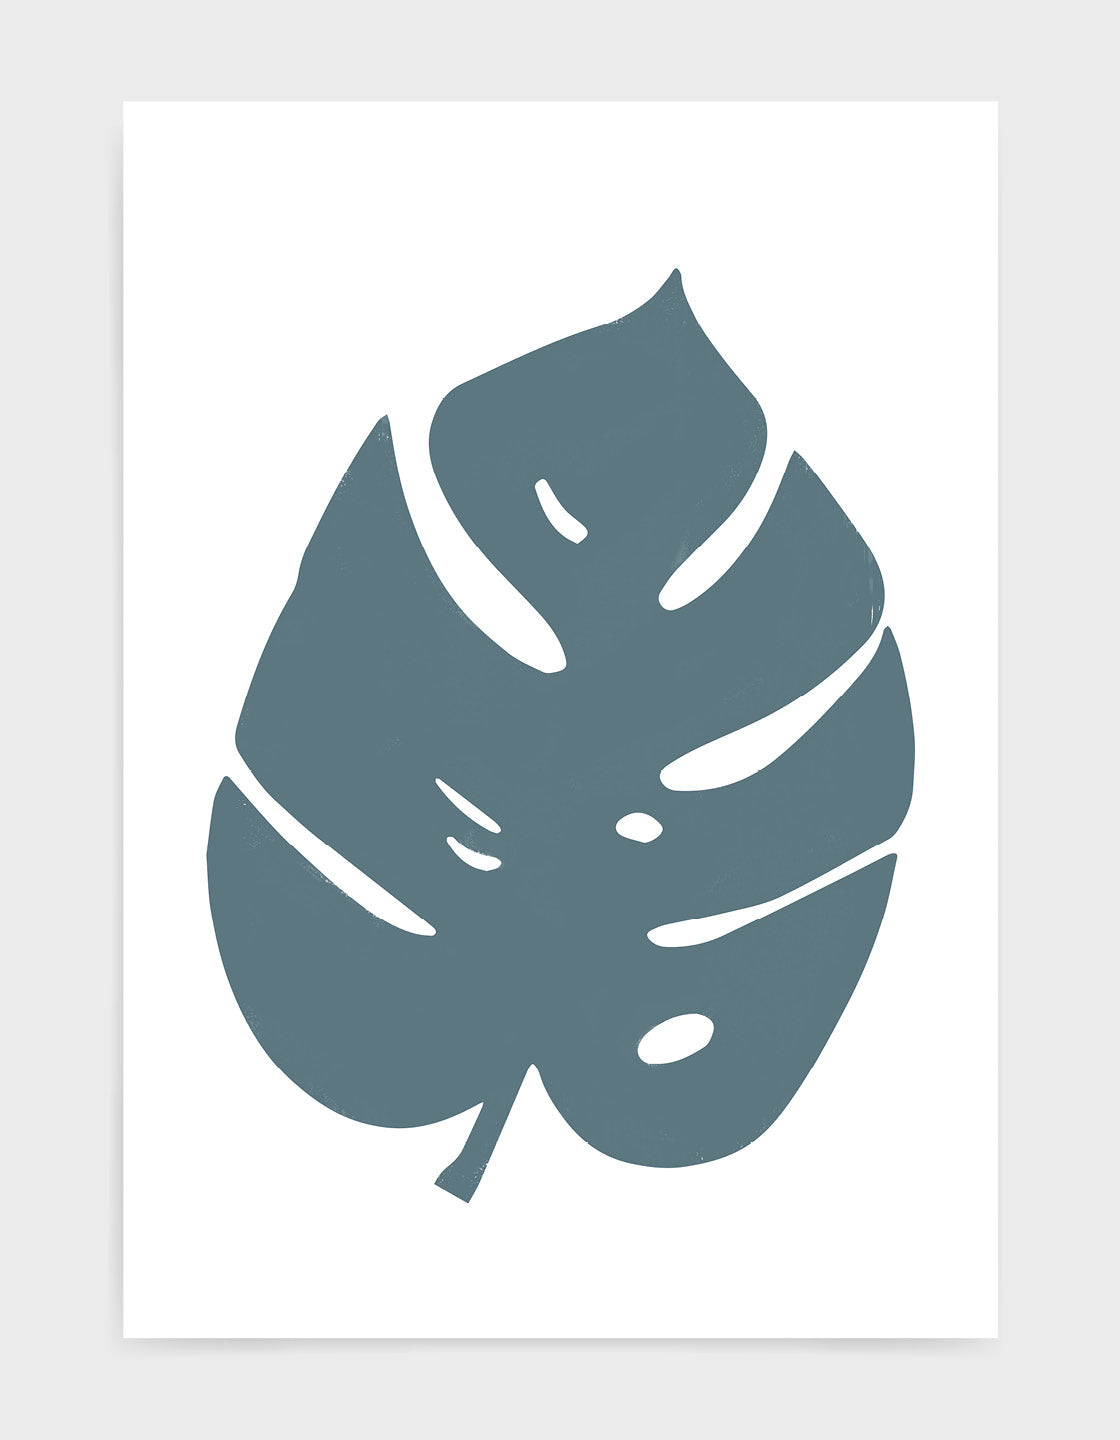 Art print depicting a large blue monstera leaf against a white background